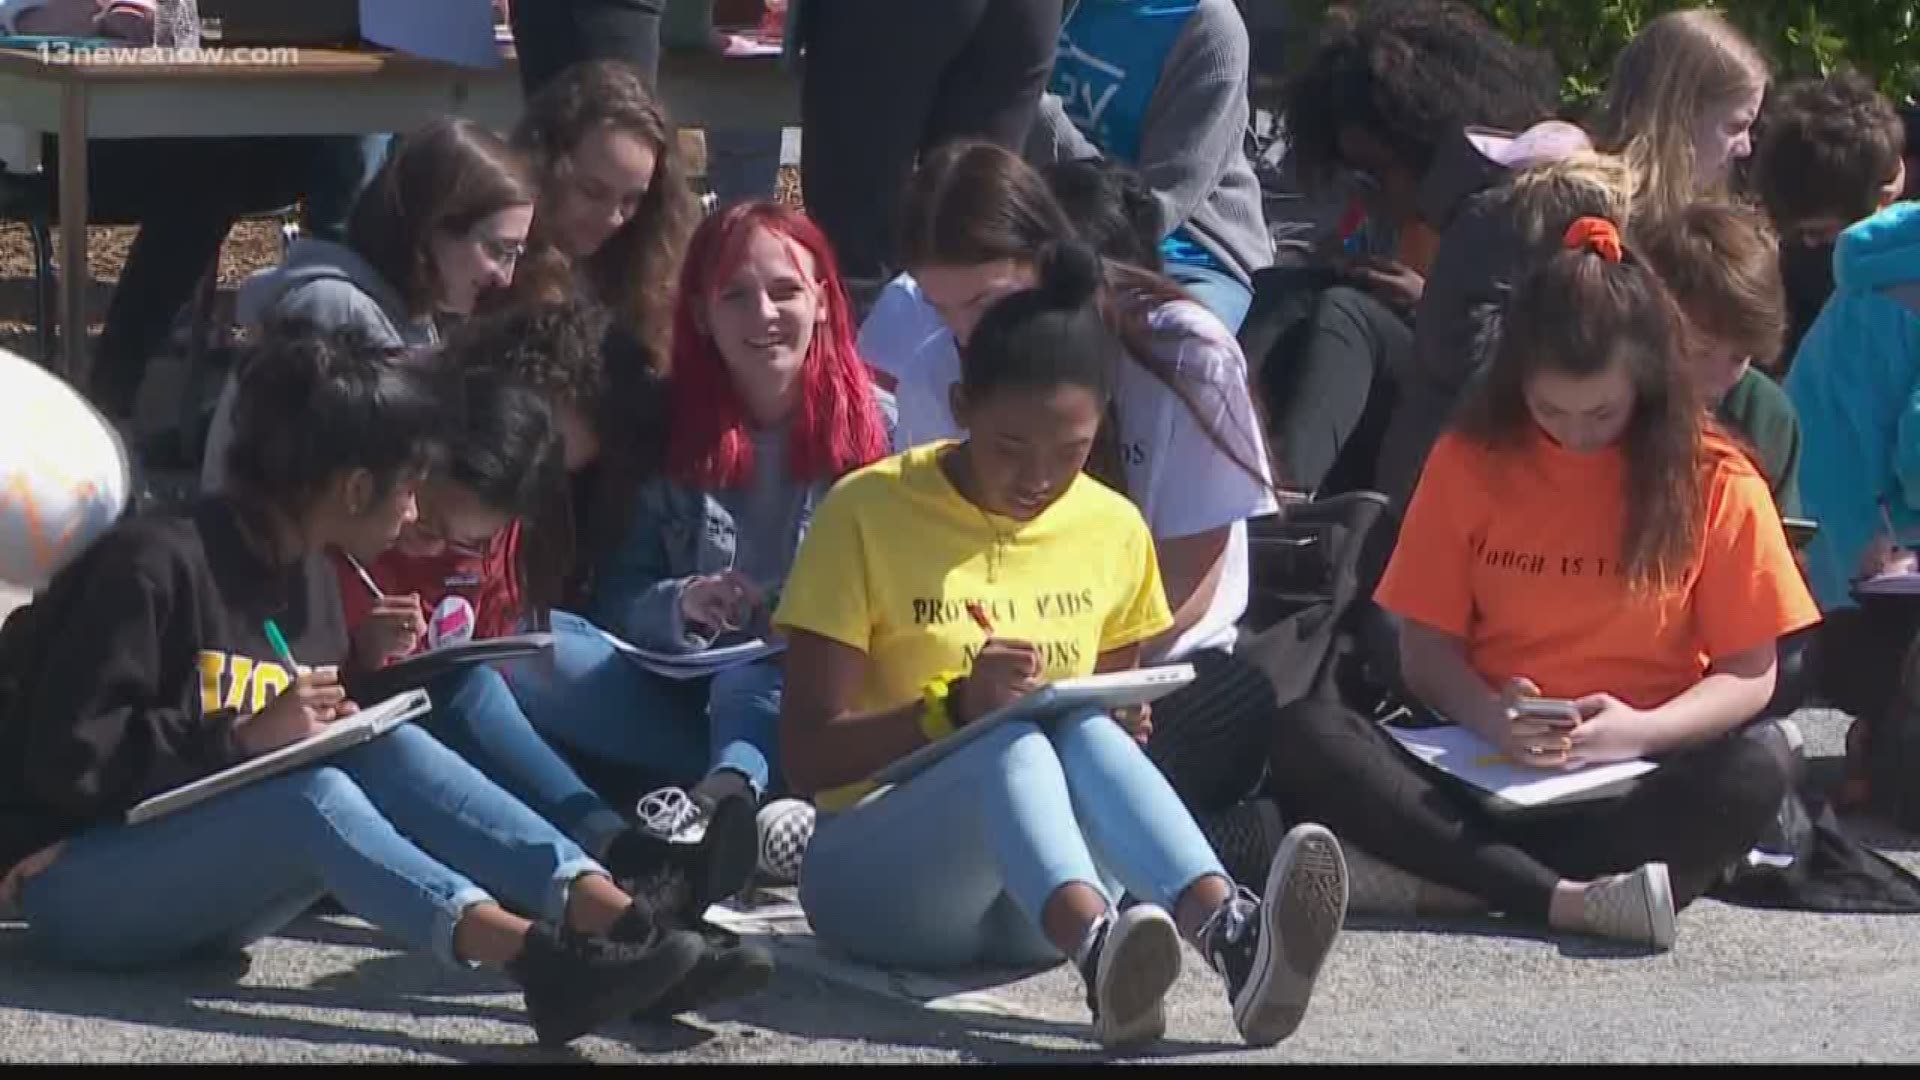 On Friday, the anniversary of the Columbine High School shooting, Virginia Beach students walked out of class to protest gun violence.